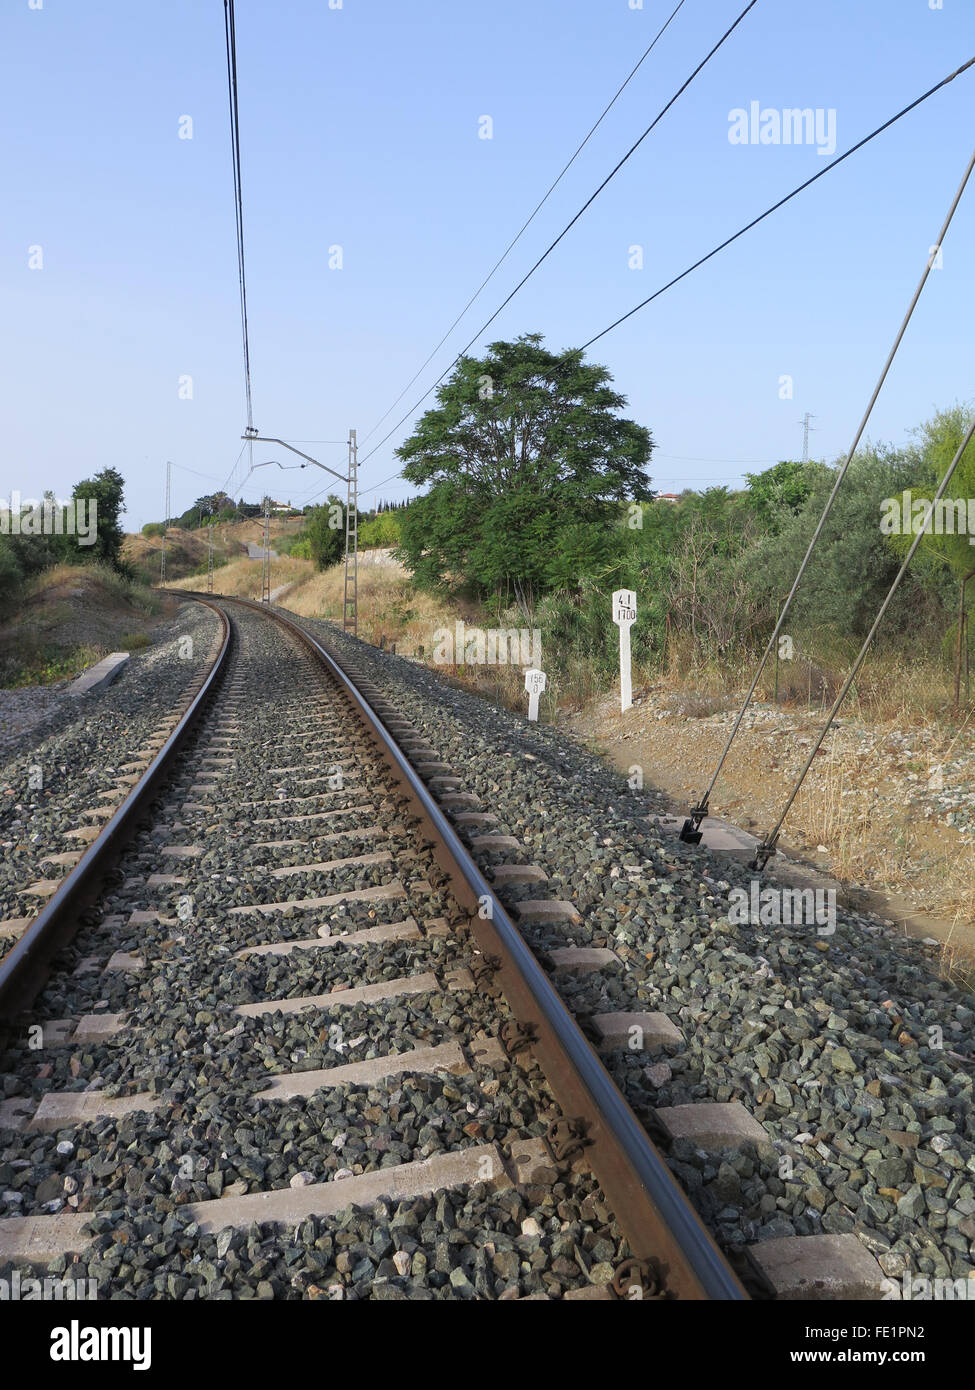 Curved Railway track in ballast on local line between Alora and Malaga, Andalucia Stock Photo